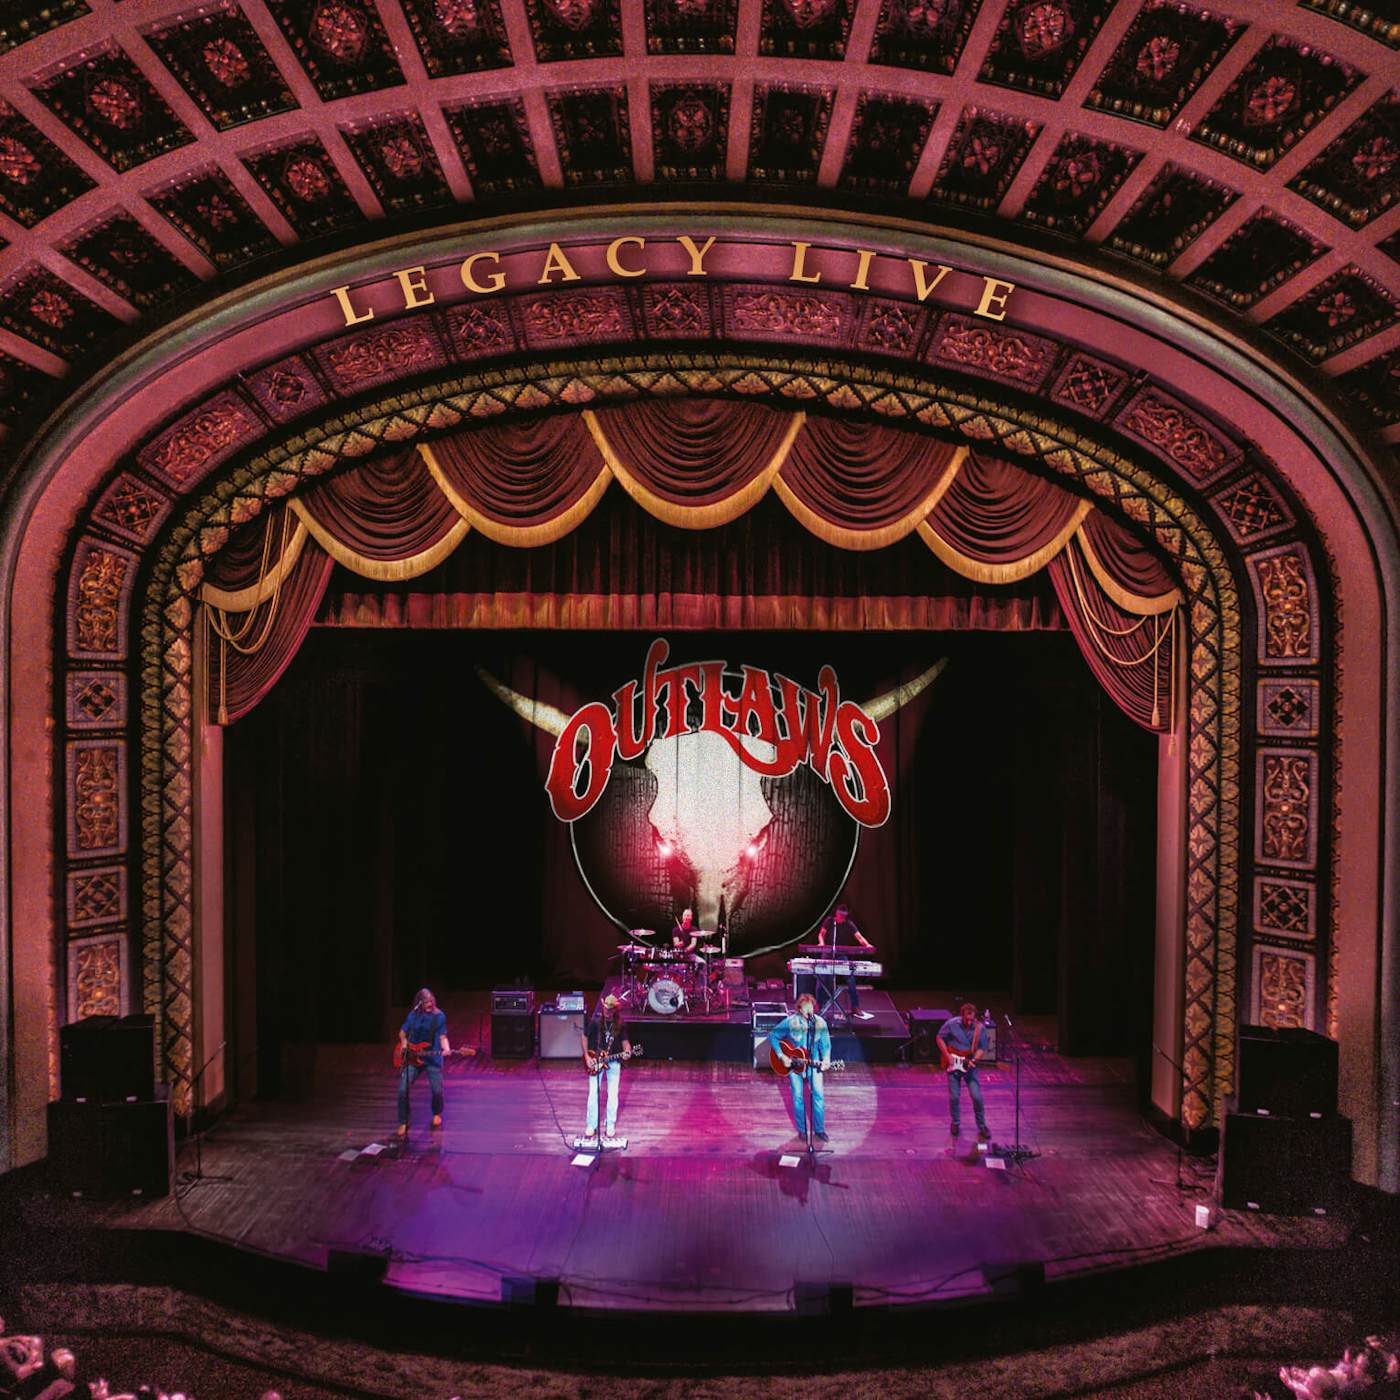 Outlaws LEGACY LIVE CD